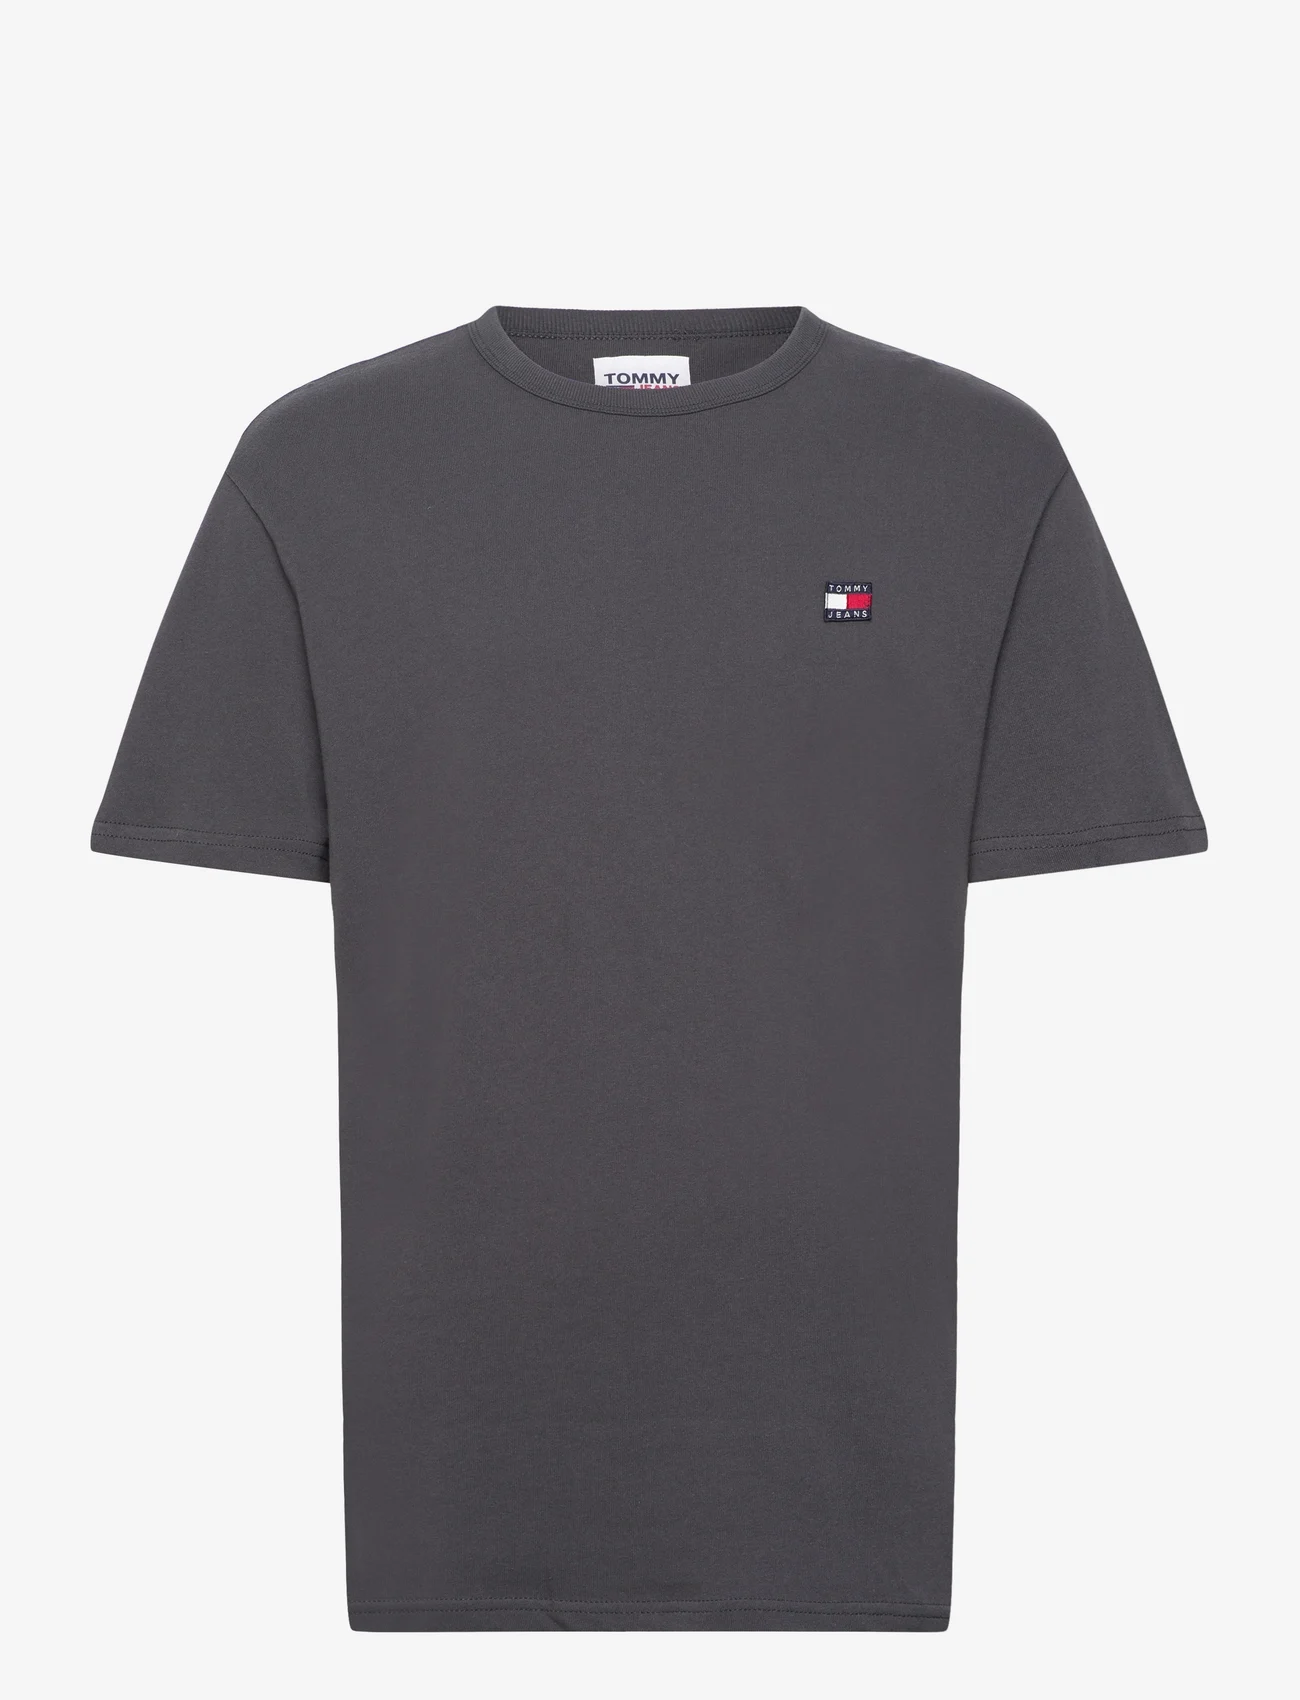 Tommy Jeans - TJM CLSC TOMMY XS BADGE TEE - basic t-shirts - new charcoal - 0